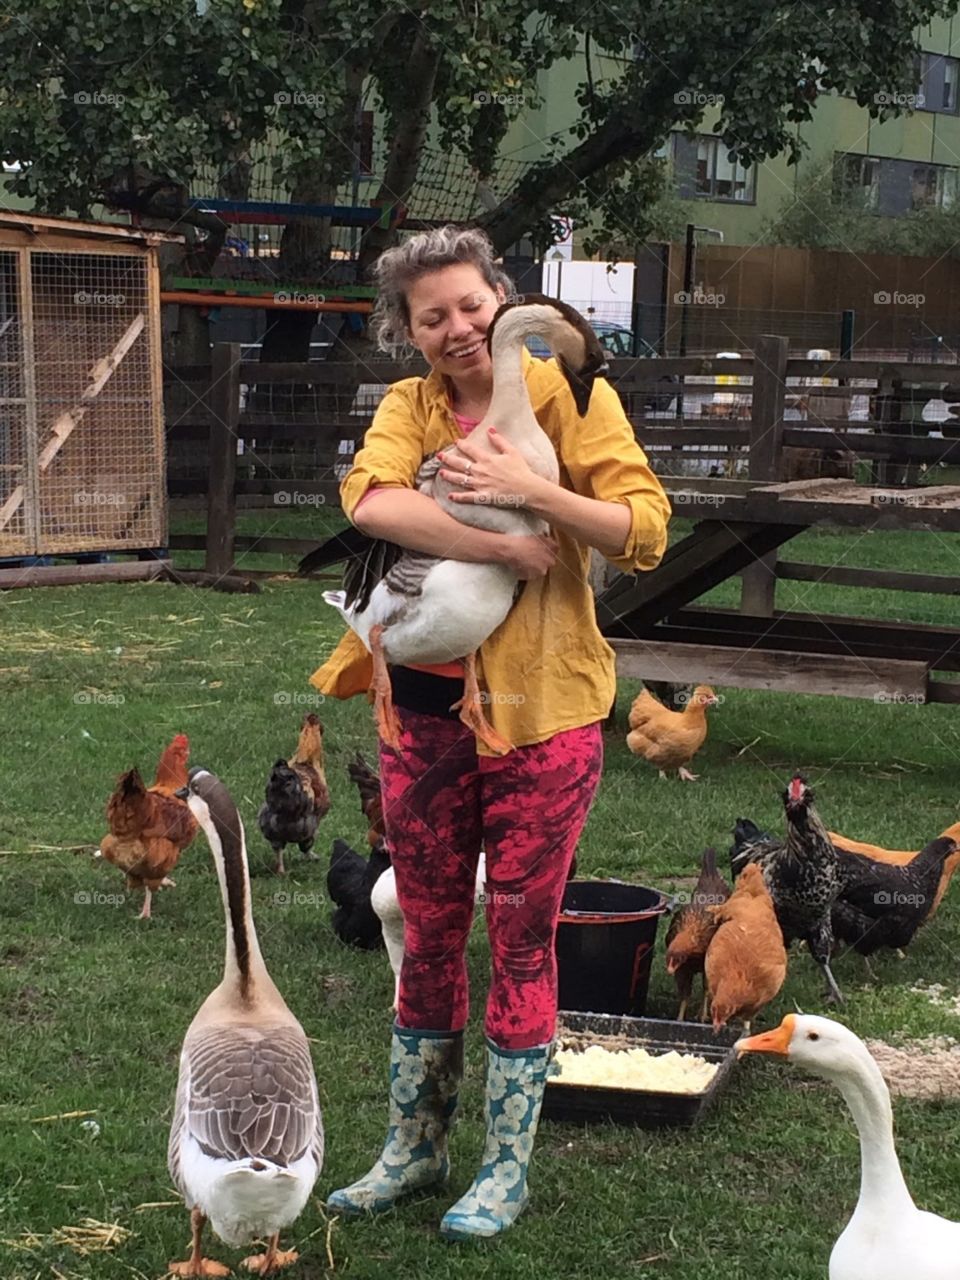 Me, surrounded by poultry